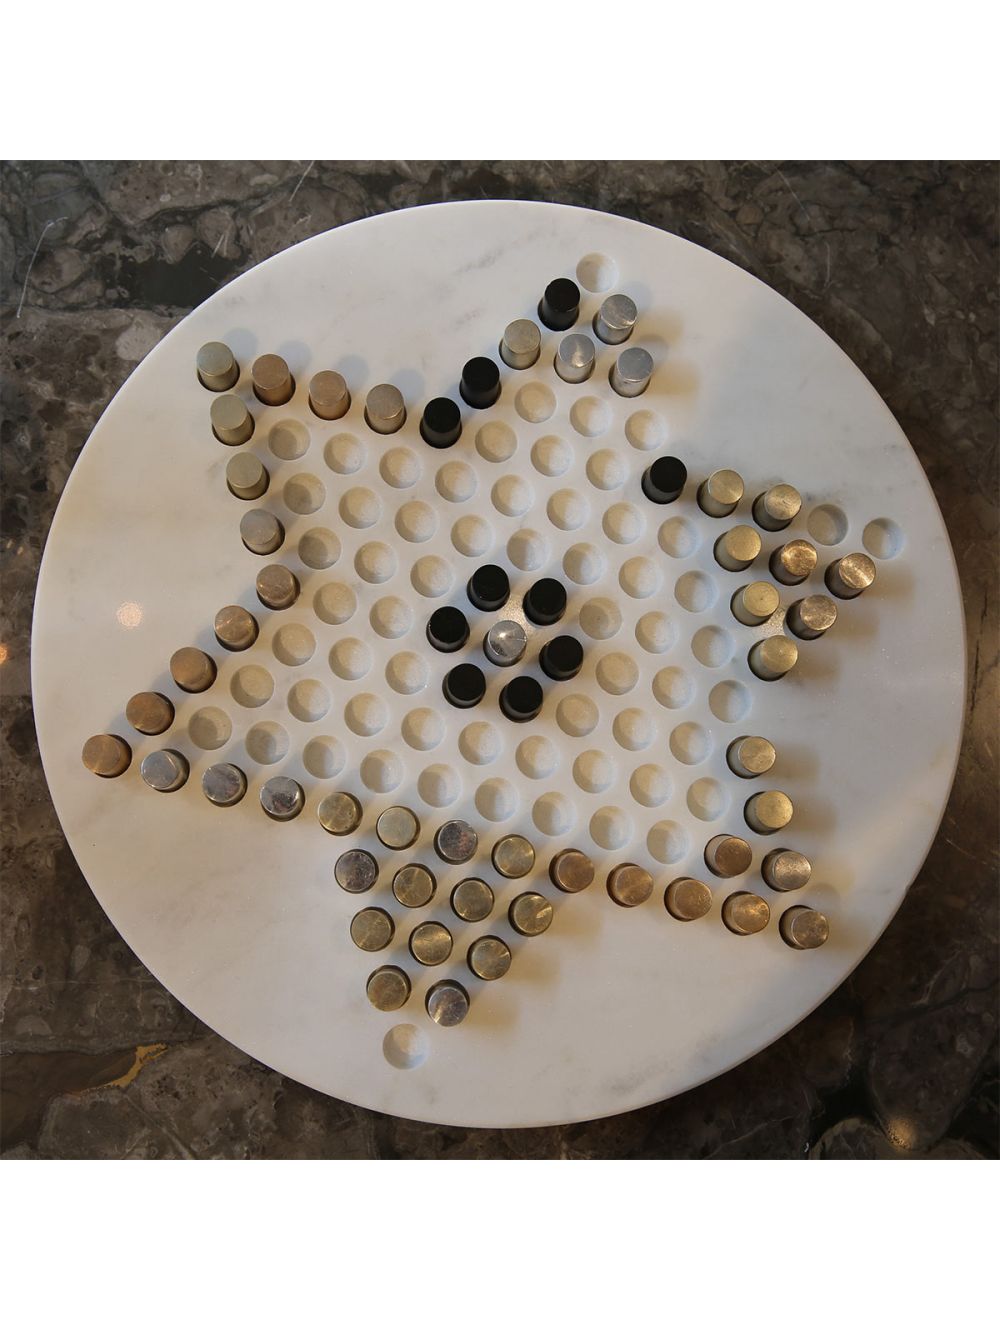 Reclaimed Chinese Checkers Game